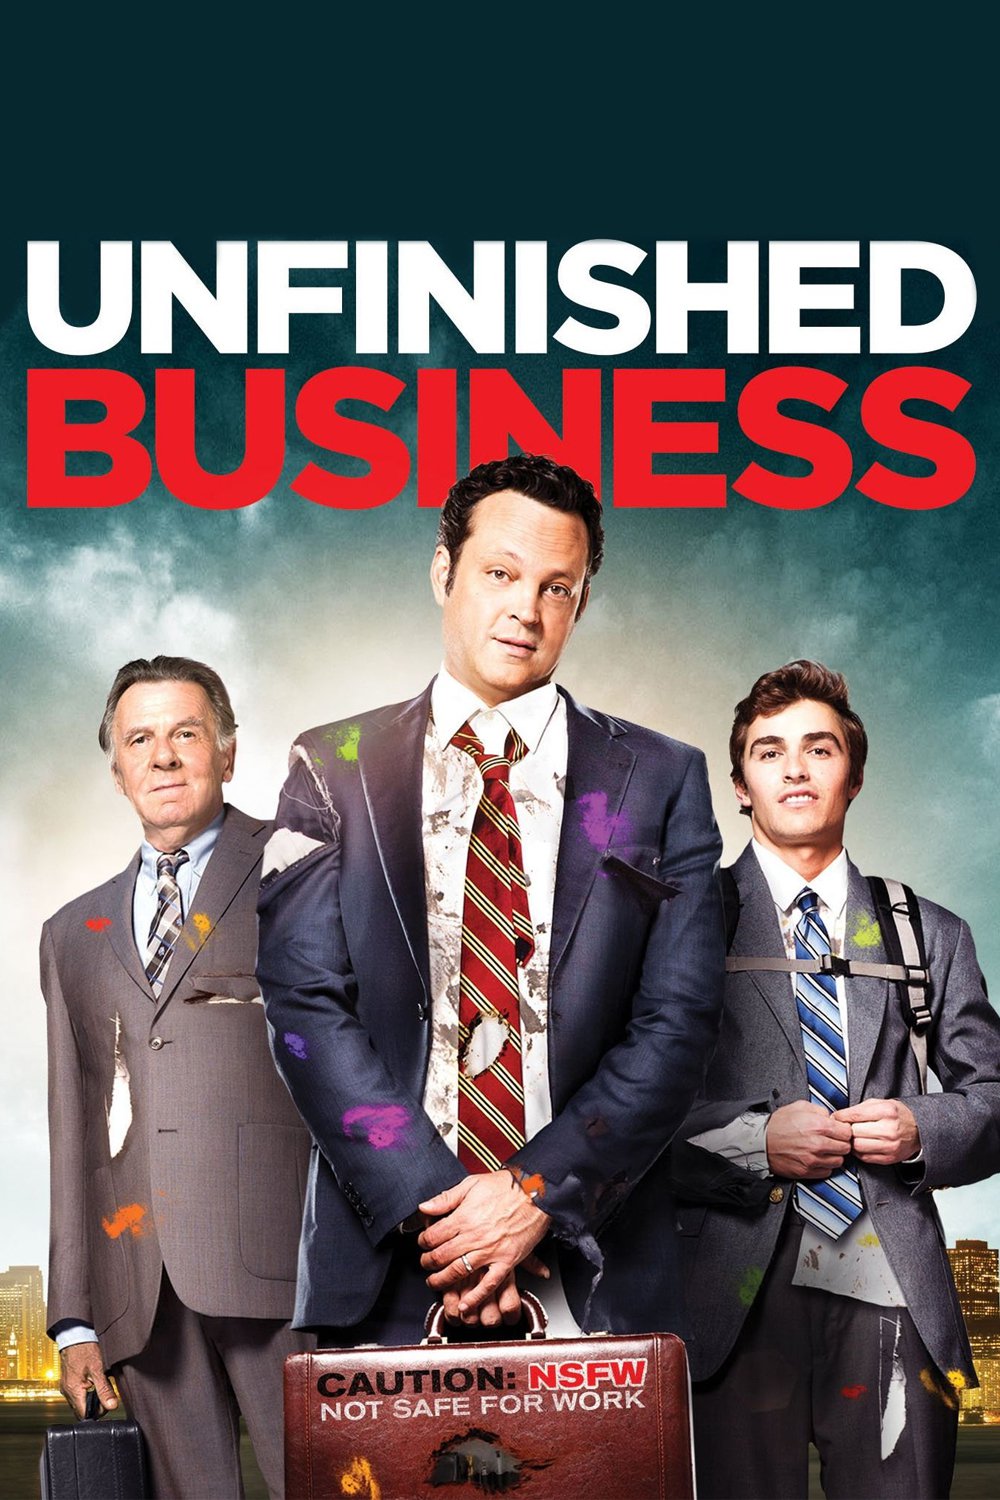 Poster for the movie "Unfinished Business"